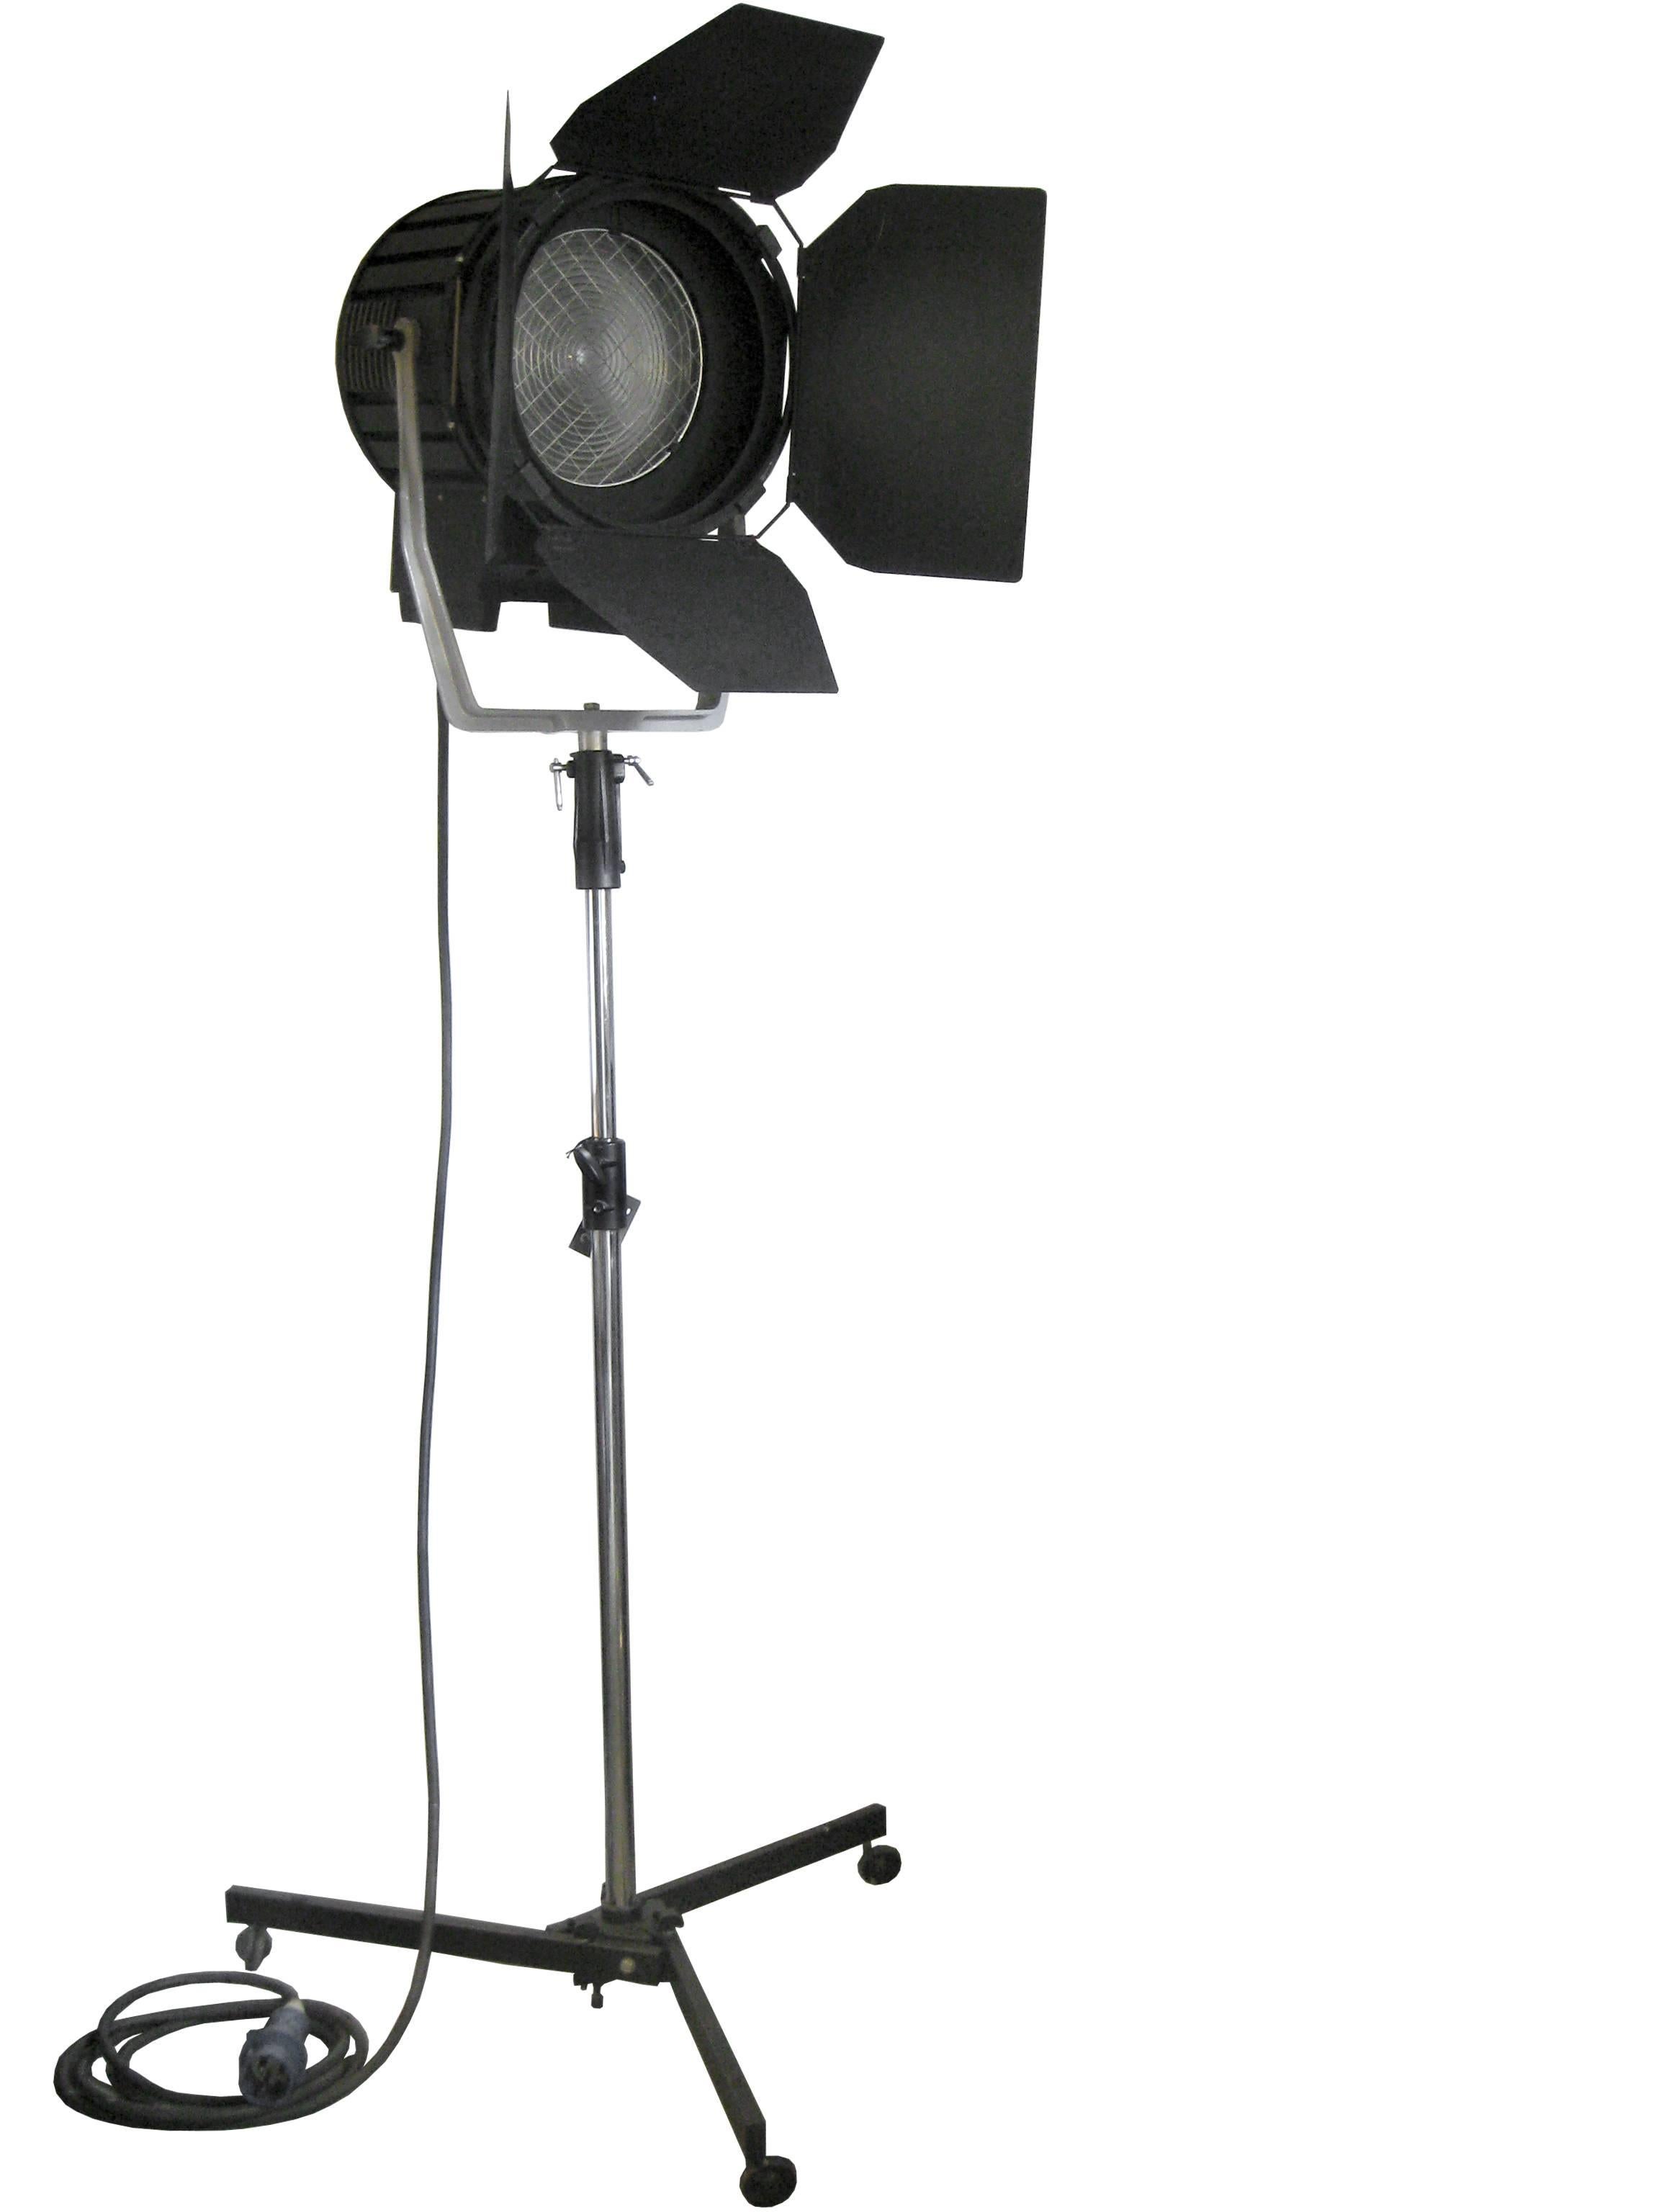 5kw film spot from the 70th-80th. Height as on the image: 210 cm.
Cross-cut lens: 40 cm wide without the barn doors: 35 cm.
On request this light can be made suitable for regular E27/E26 light bulbs.

Weight: 9.5 kg / 20.9 lb

All lamps have been